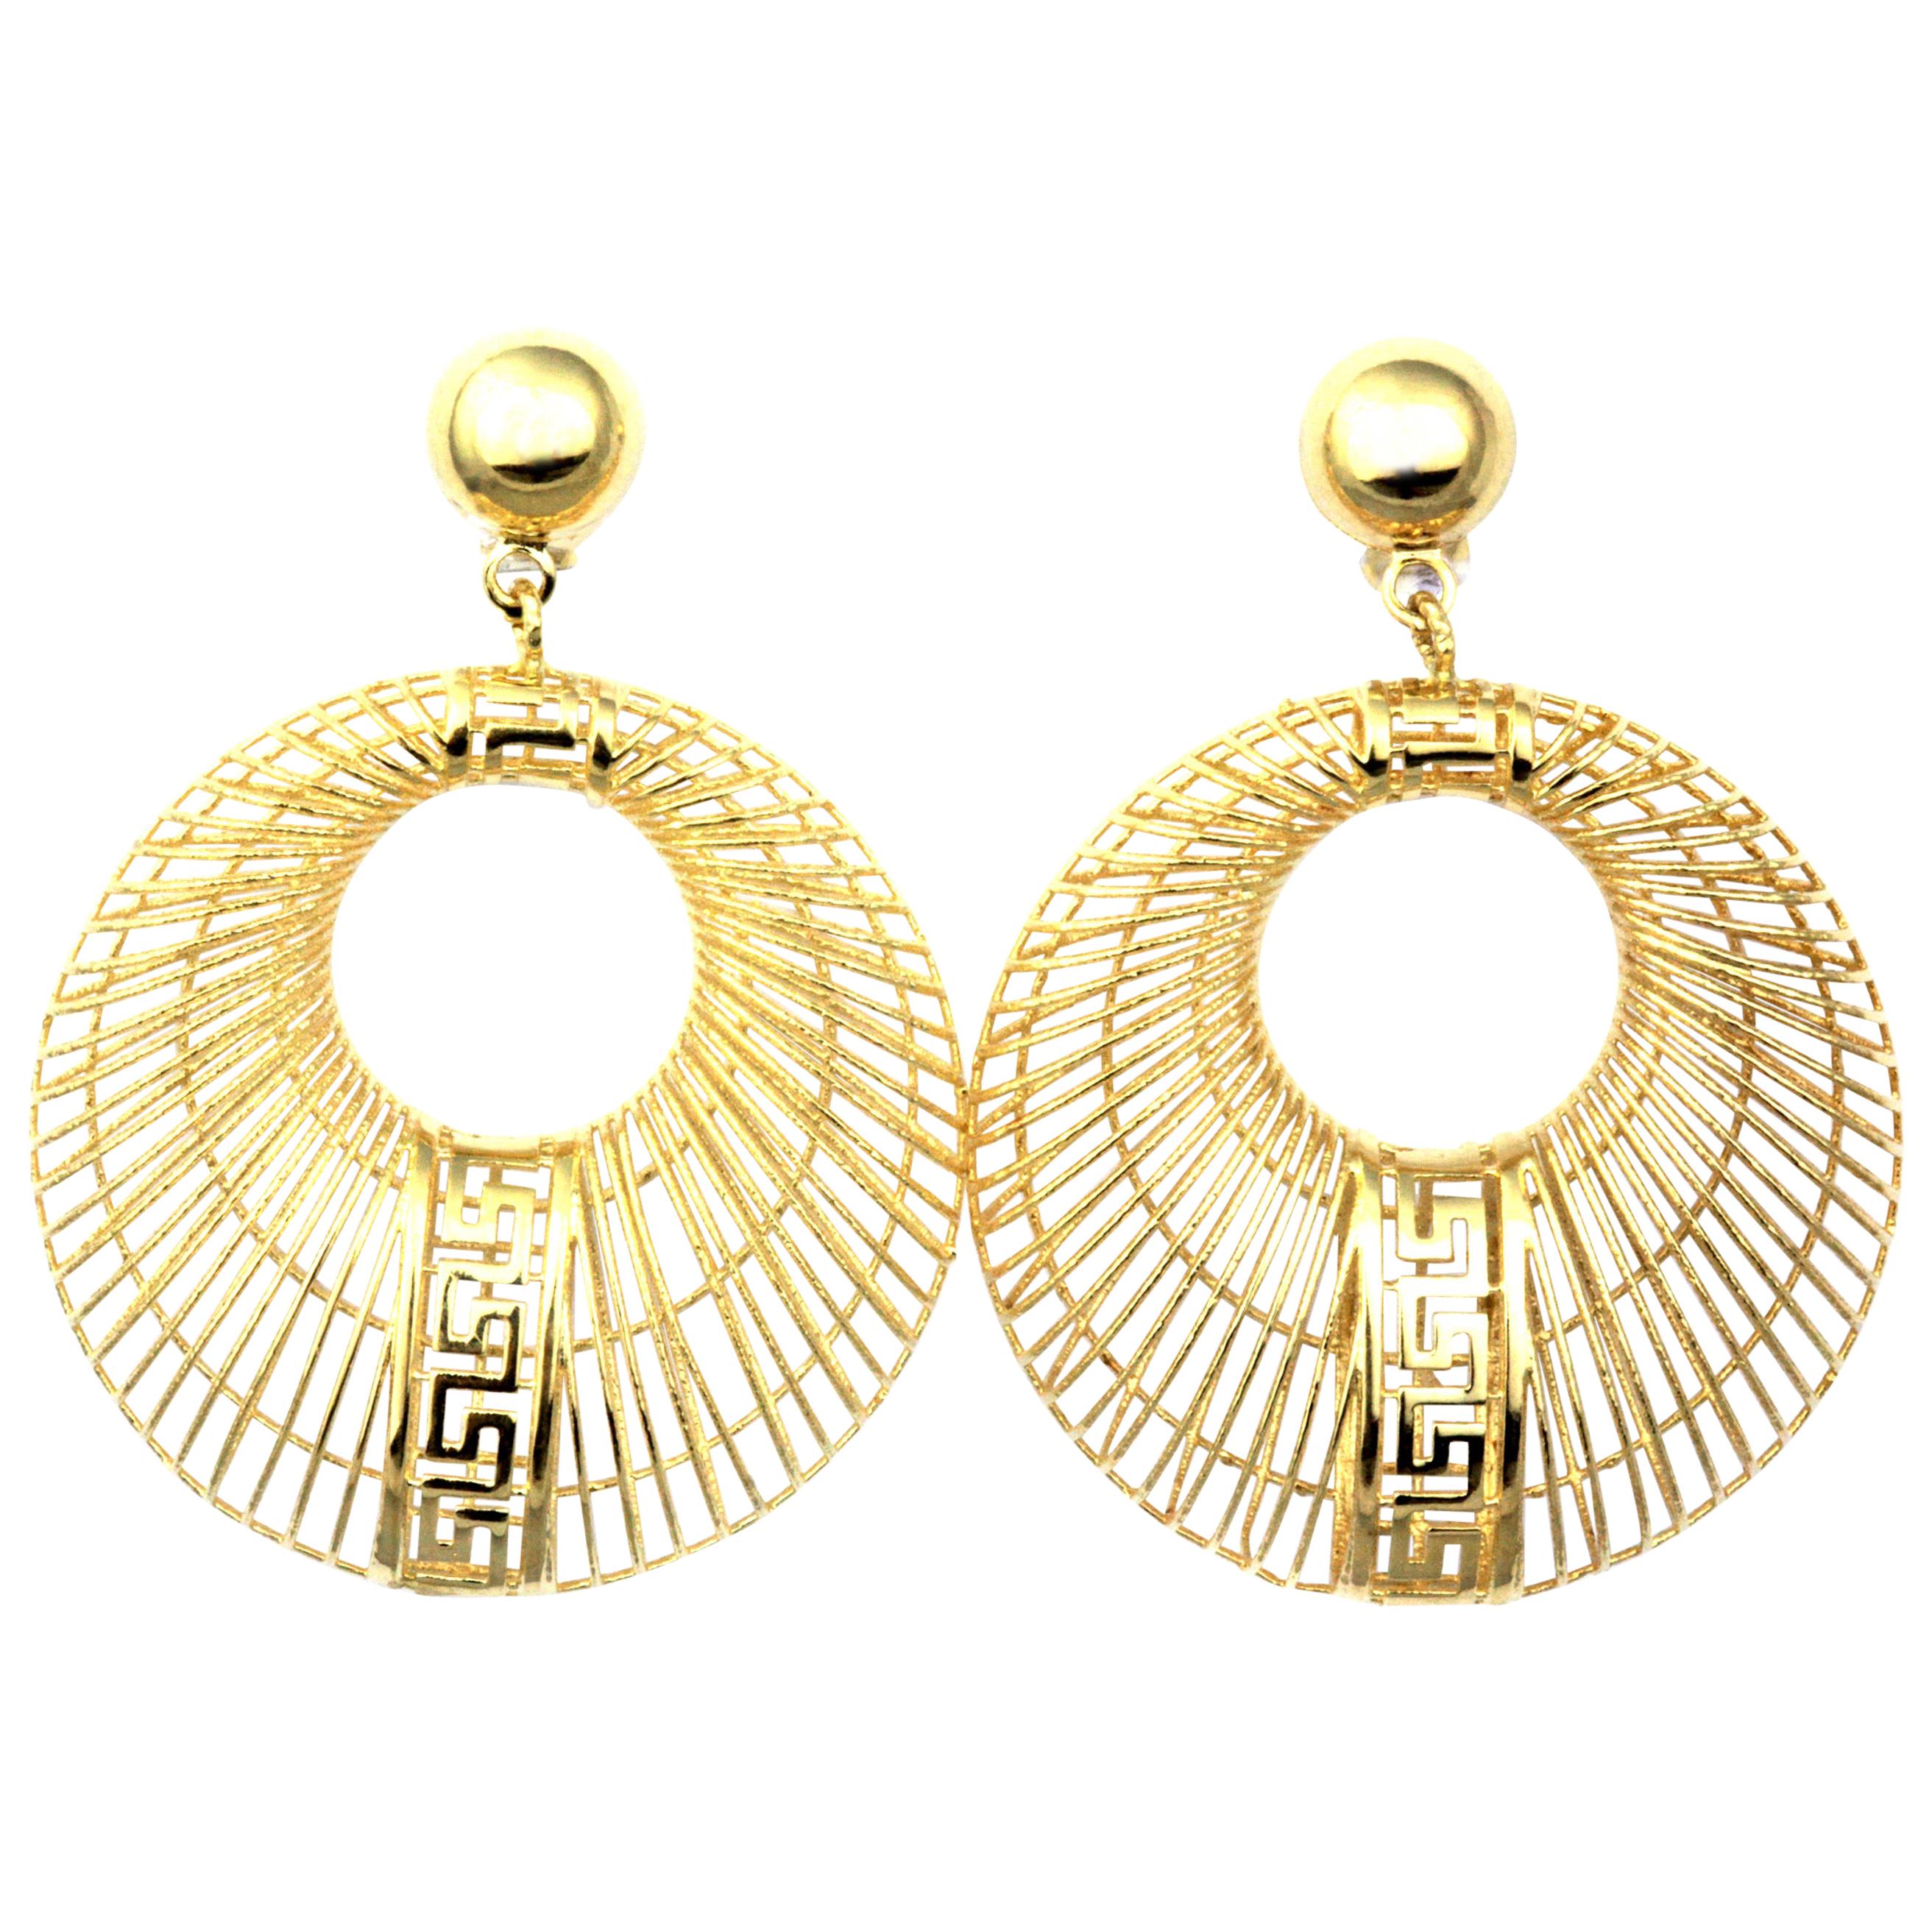 Pair of Earrings and Matching Pendant, Greek Key Design in 18 Karat Yellow Gold For Sale